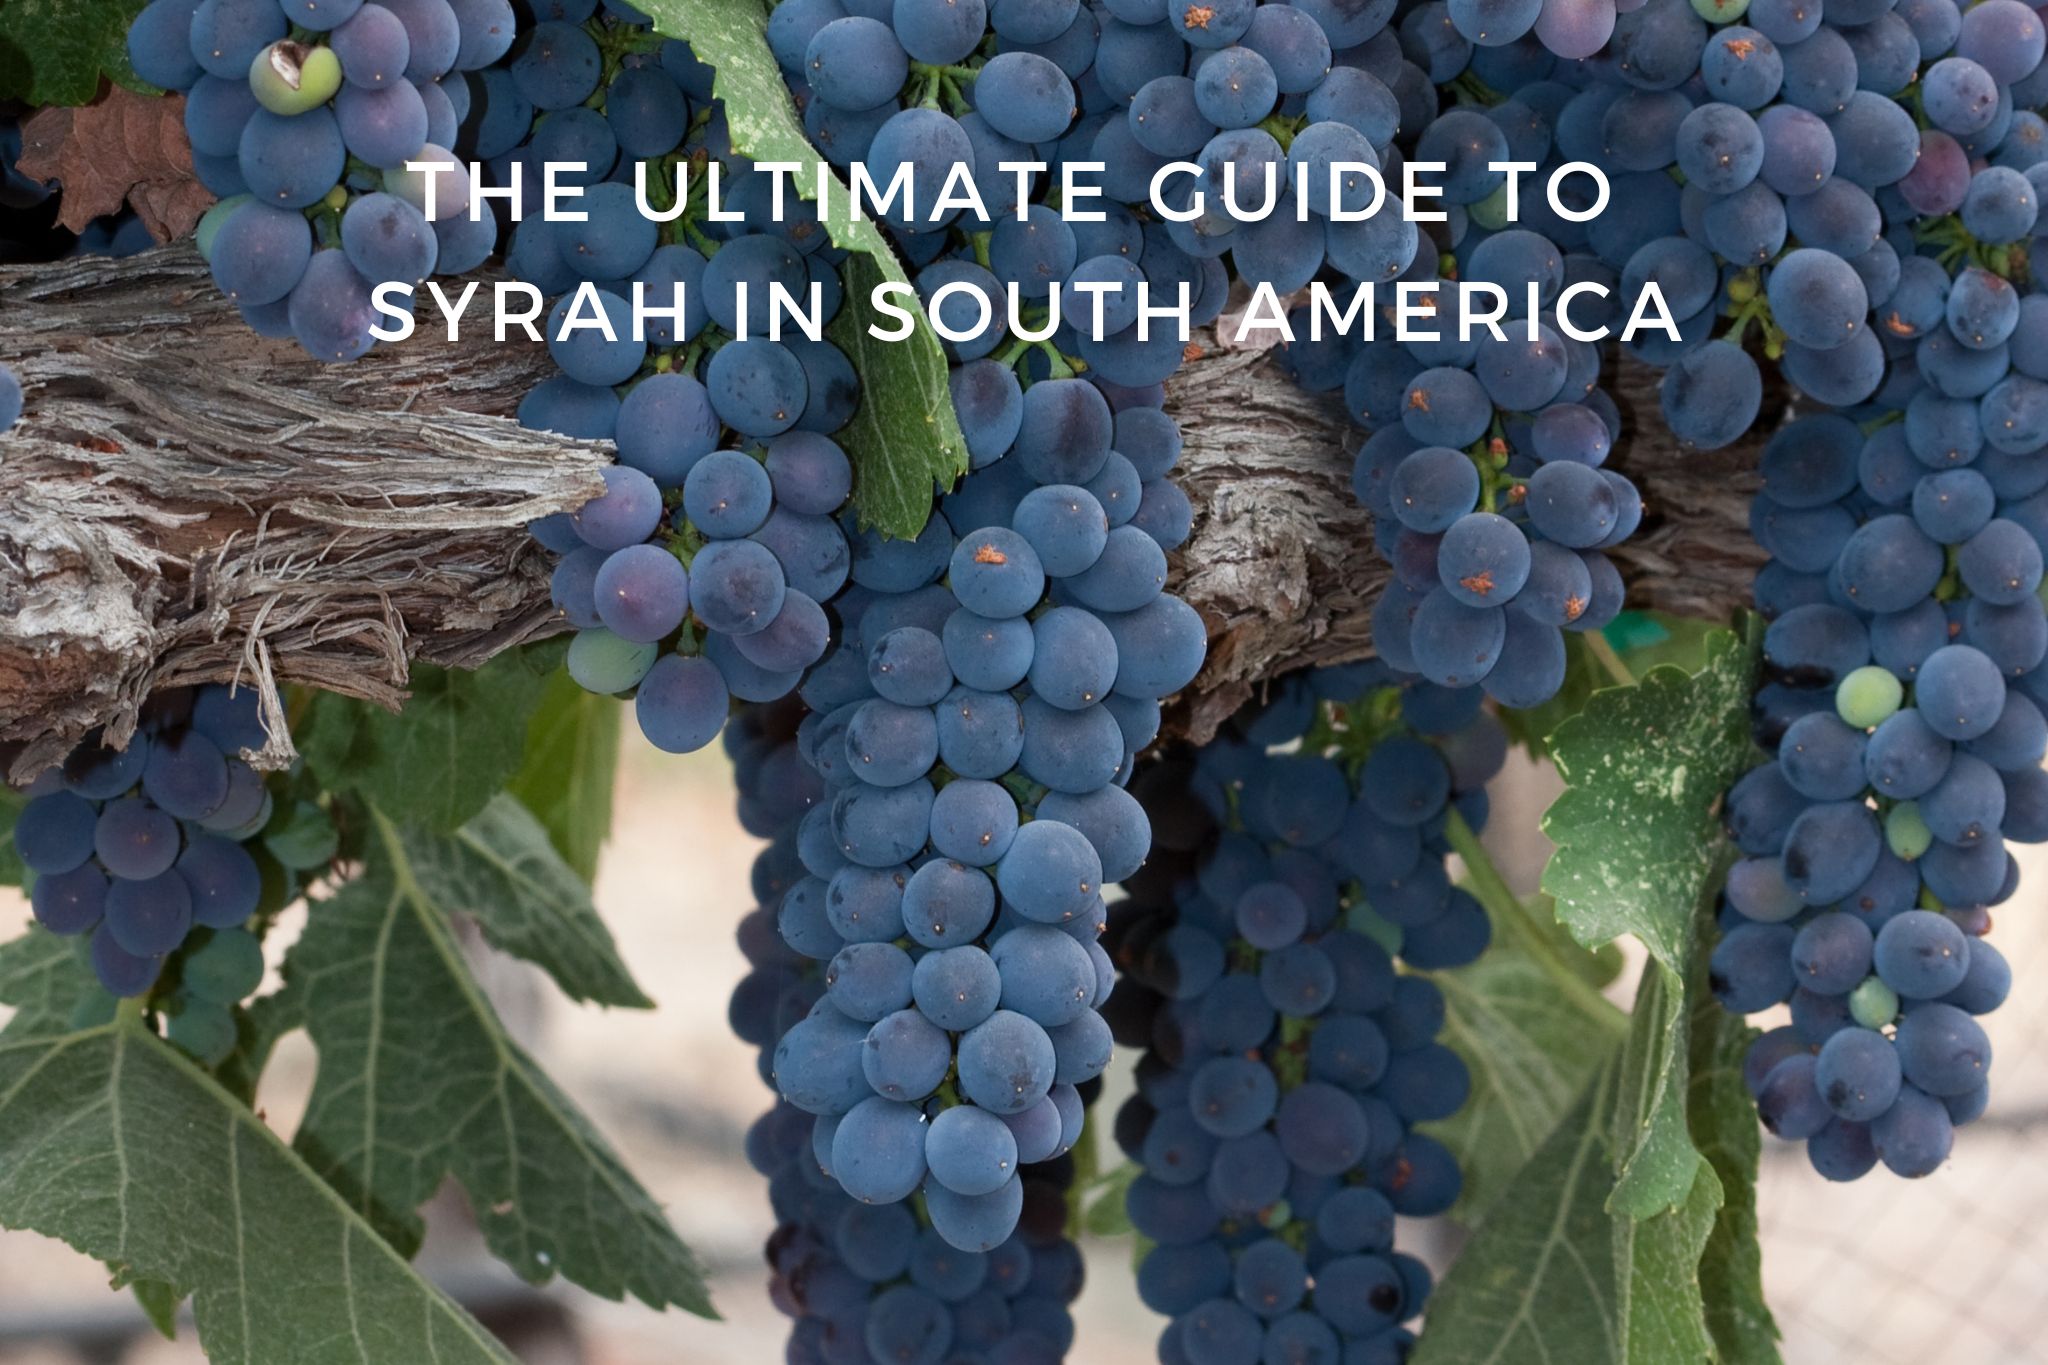 The ultimate guide to Syrah wines in Chile, Argentina, Brazil and Uruguay